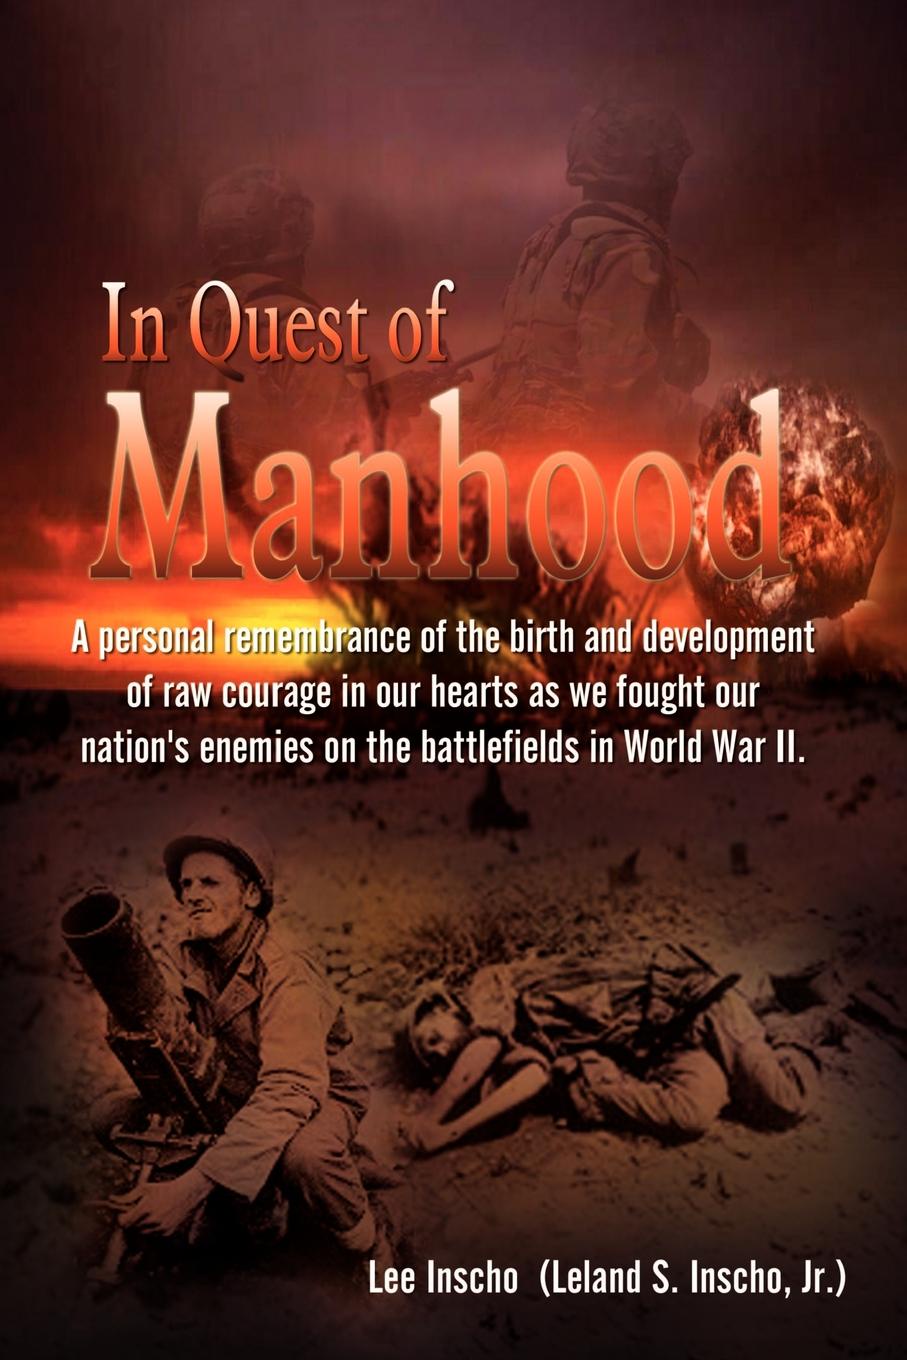 In Quest of Manhood. A personal remembrance of the birth and development of raw courage in our hearts as we fought our nation`s enemies on the battlefields in World War II.